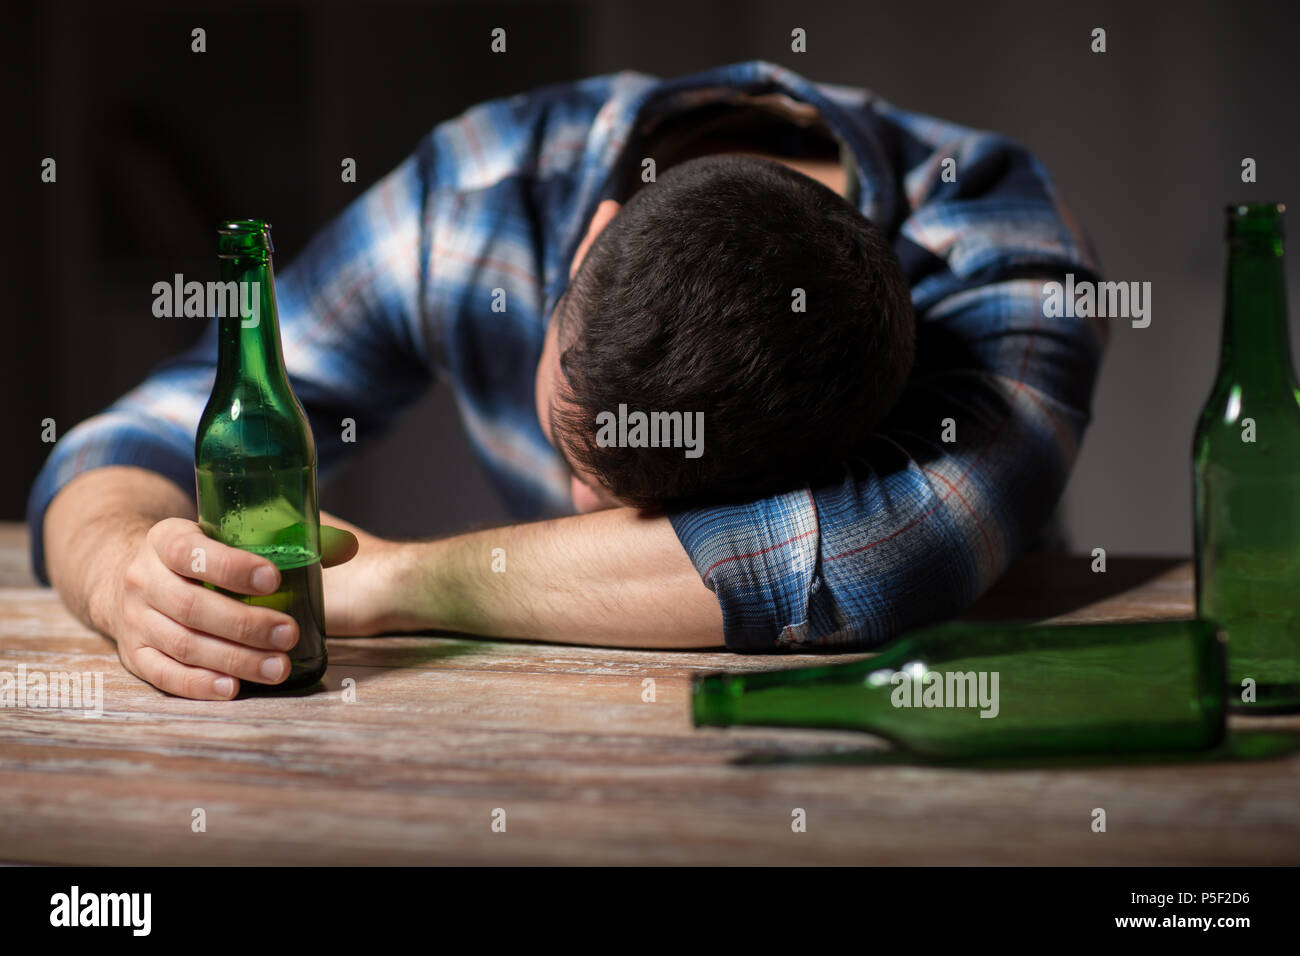 Drunk Man With Beer Bottles On Table At Night Stock Photo Alamy